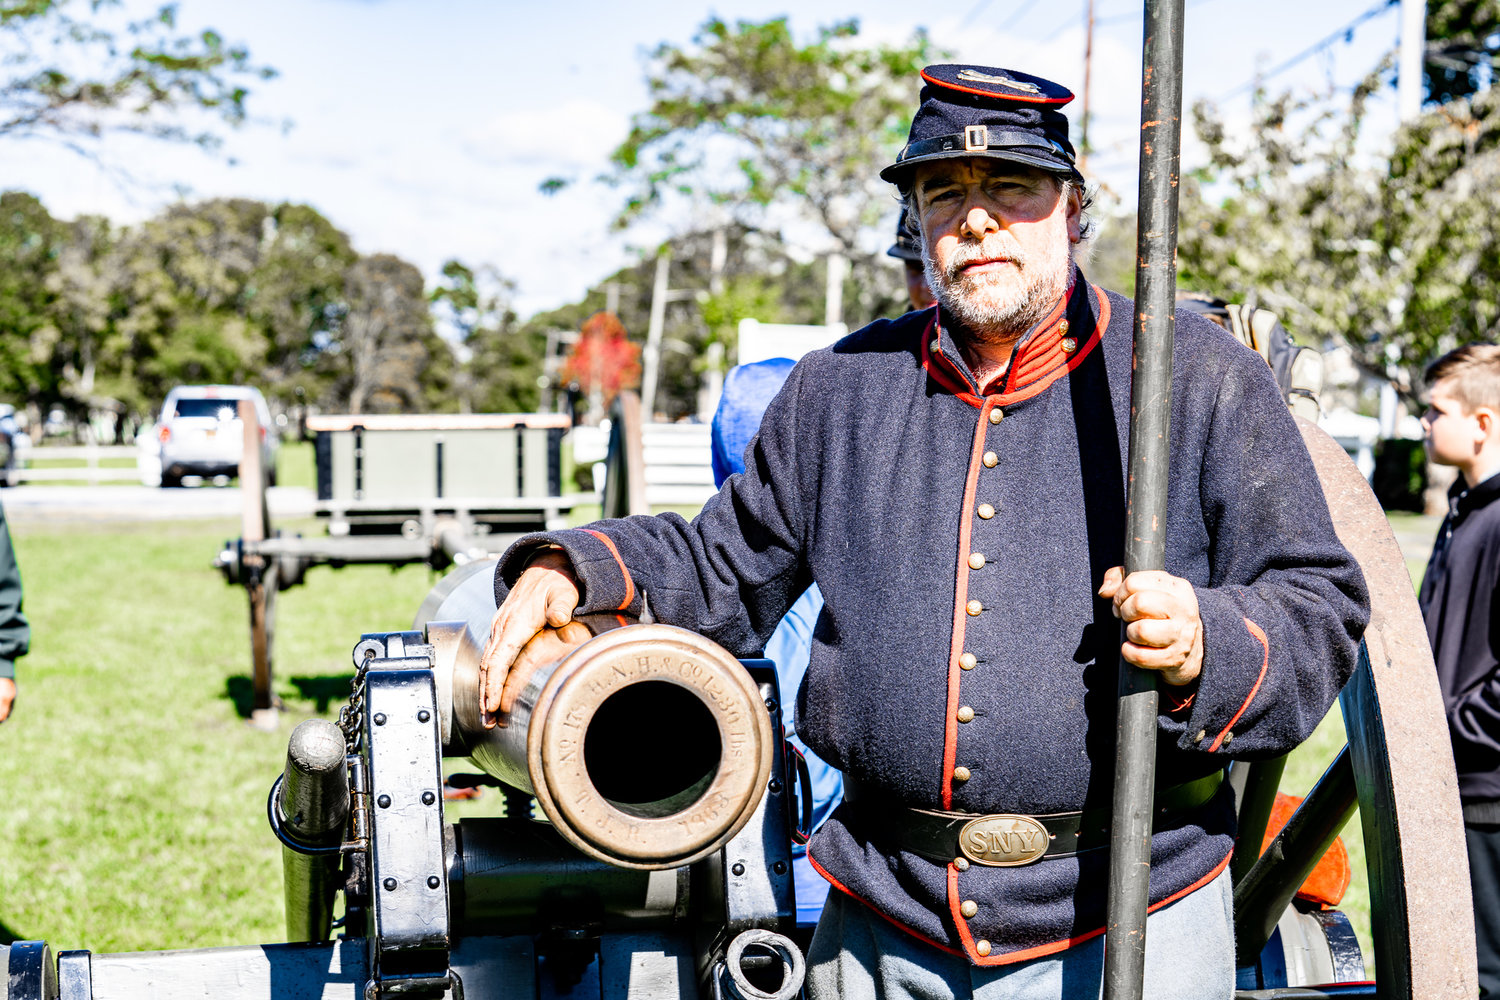 A Union soldier poses by a cannon.